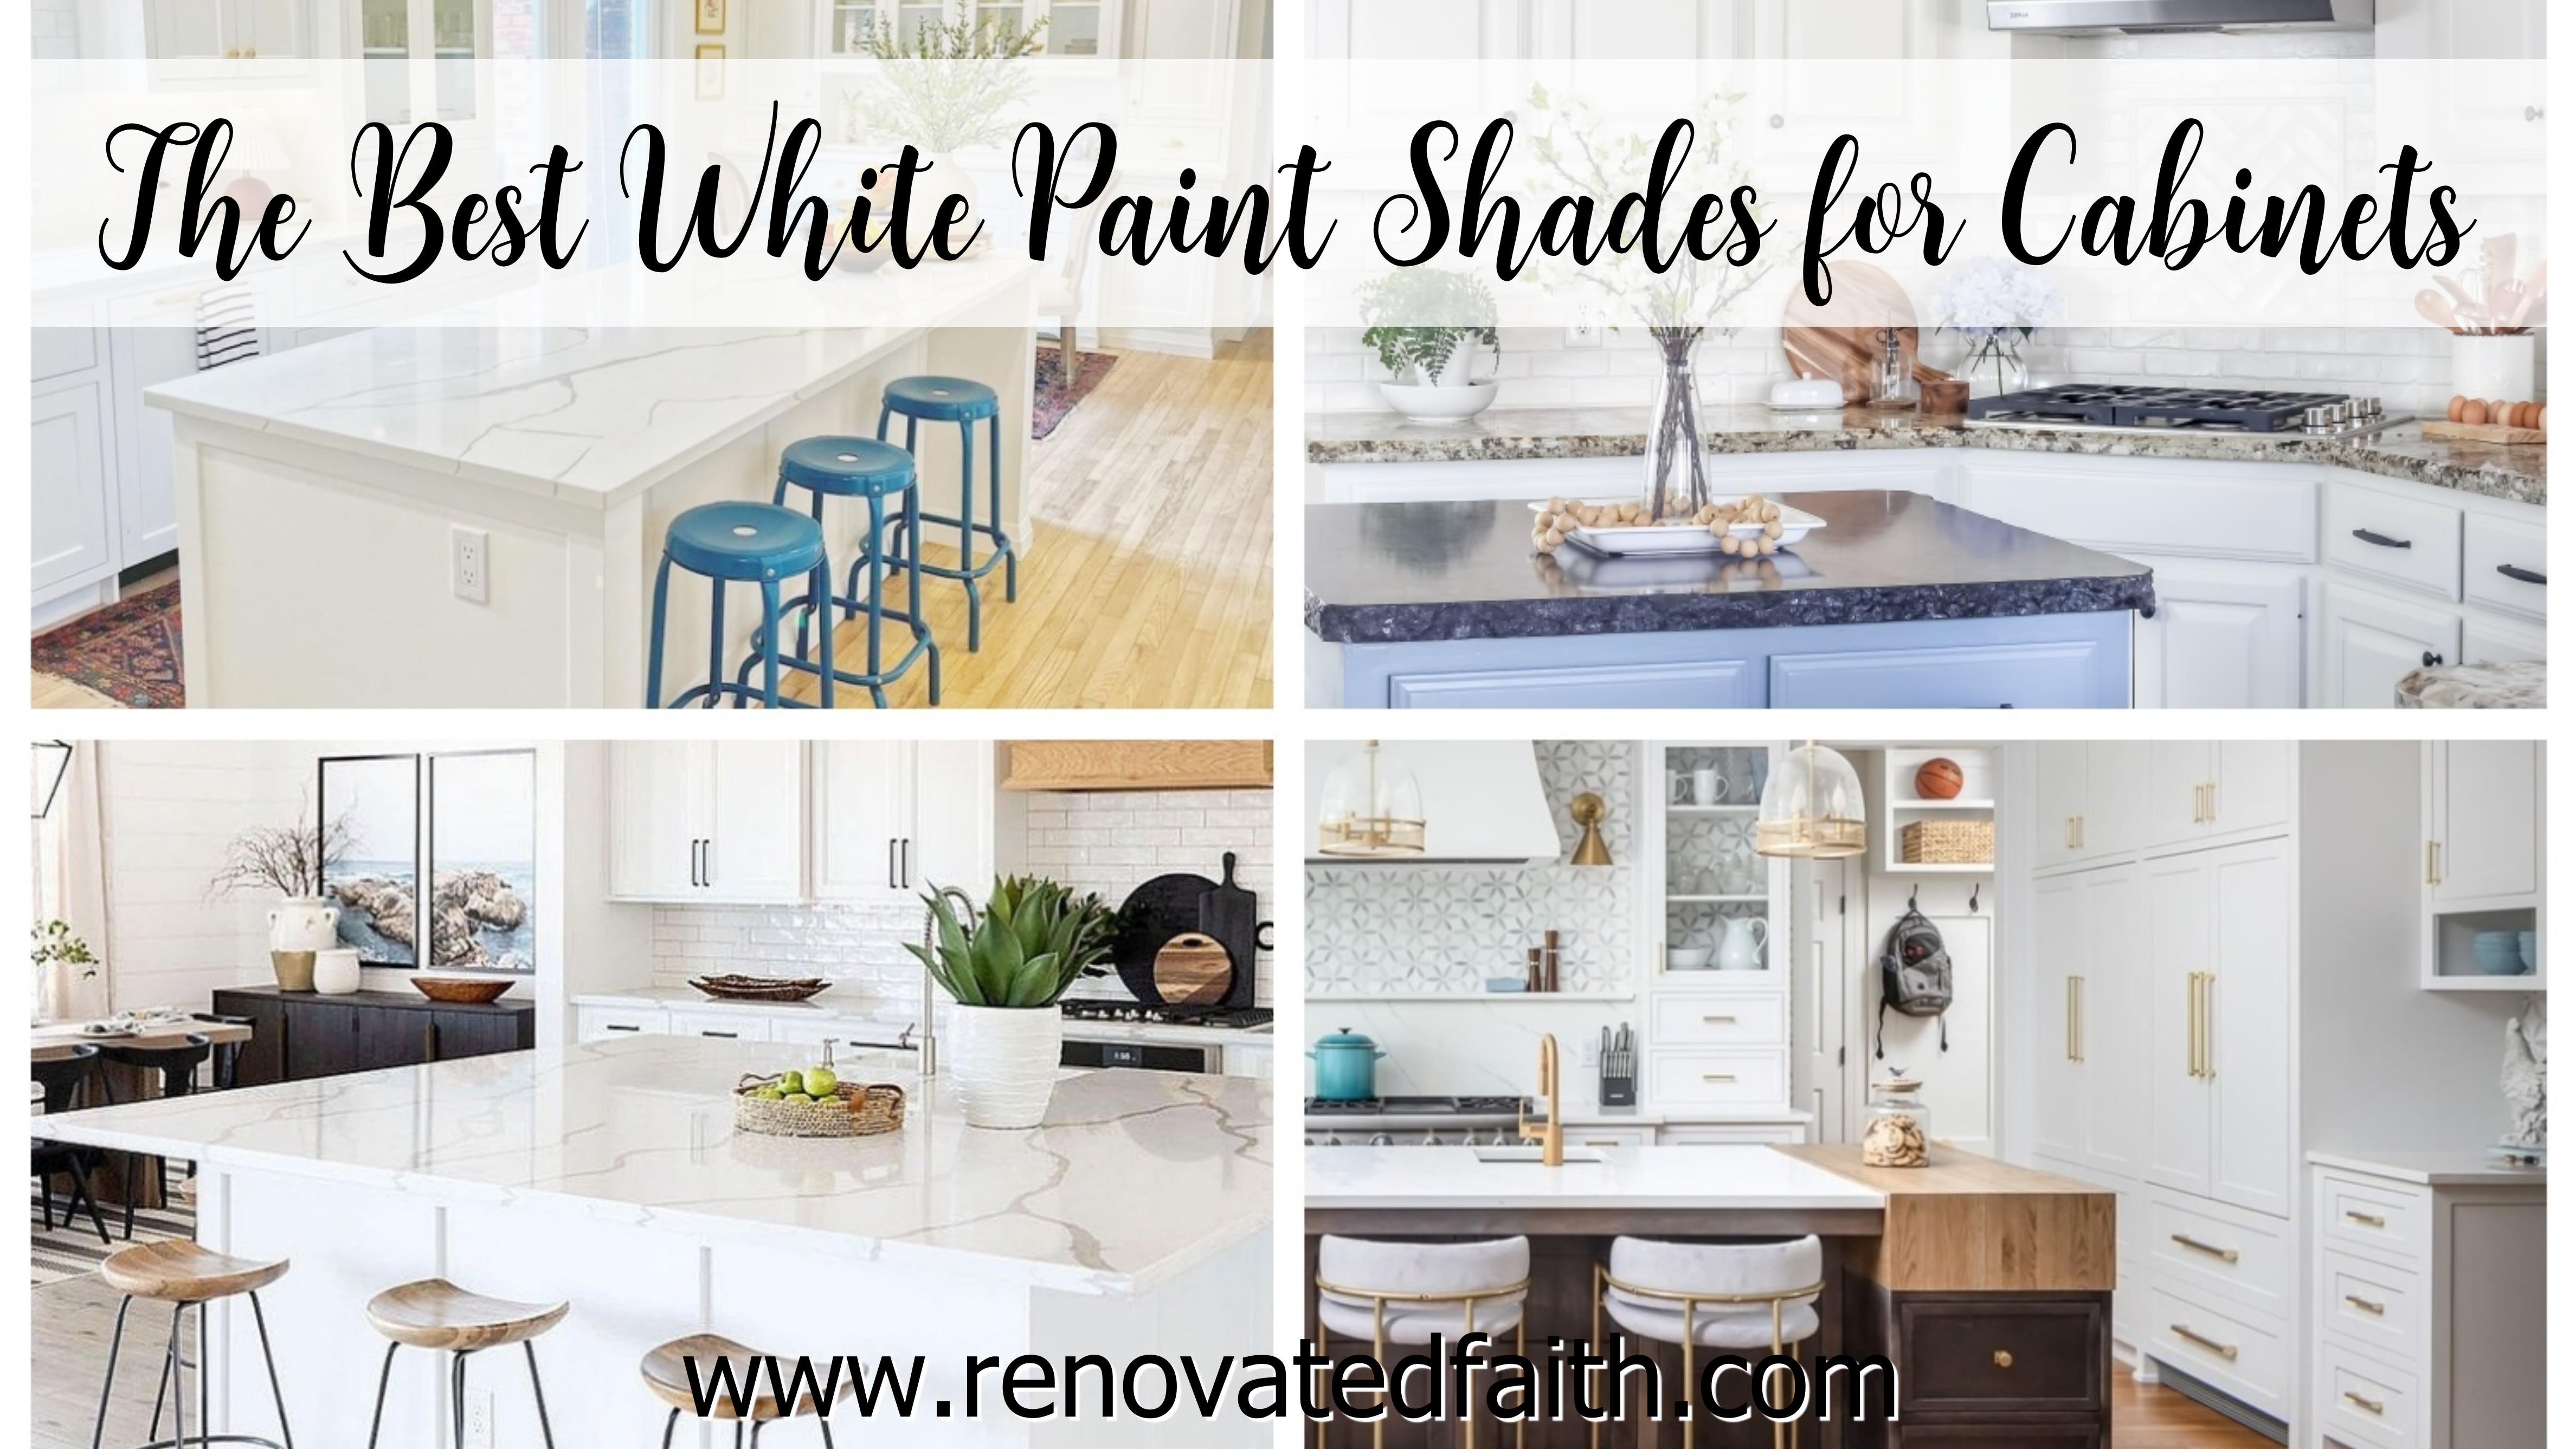 SW- Alabaster. Ceiling-flat; walls-satin; trim- Semigloss  White paint  colors sherwin williams, White paint colors, Best white paint